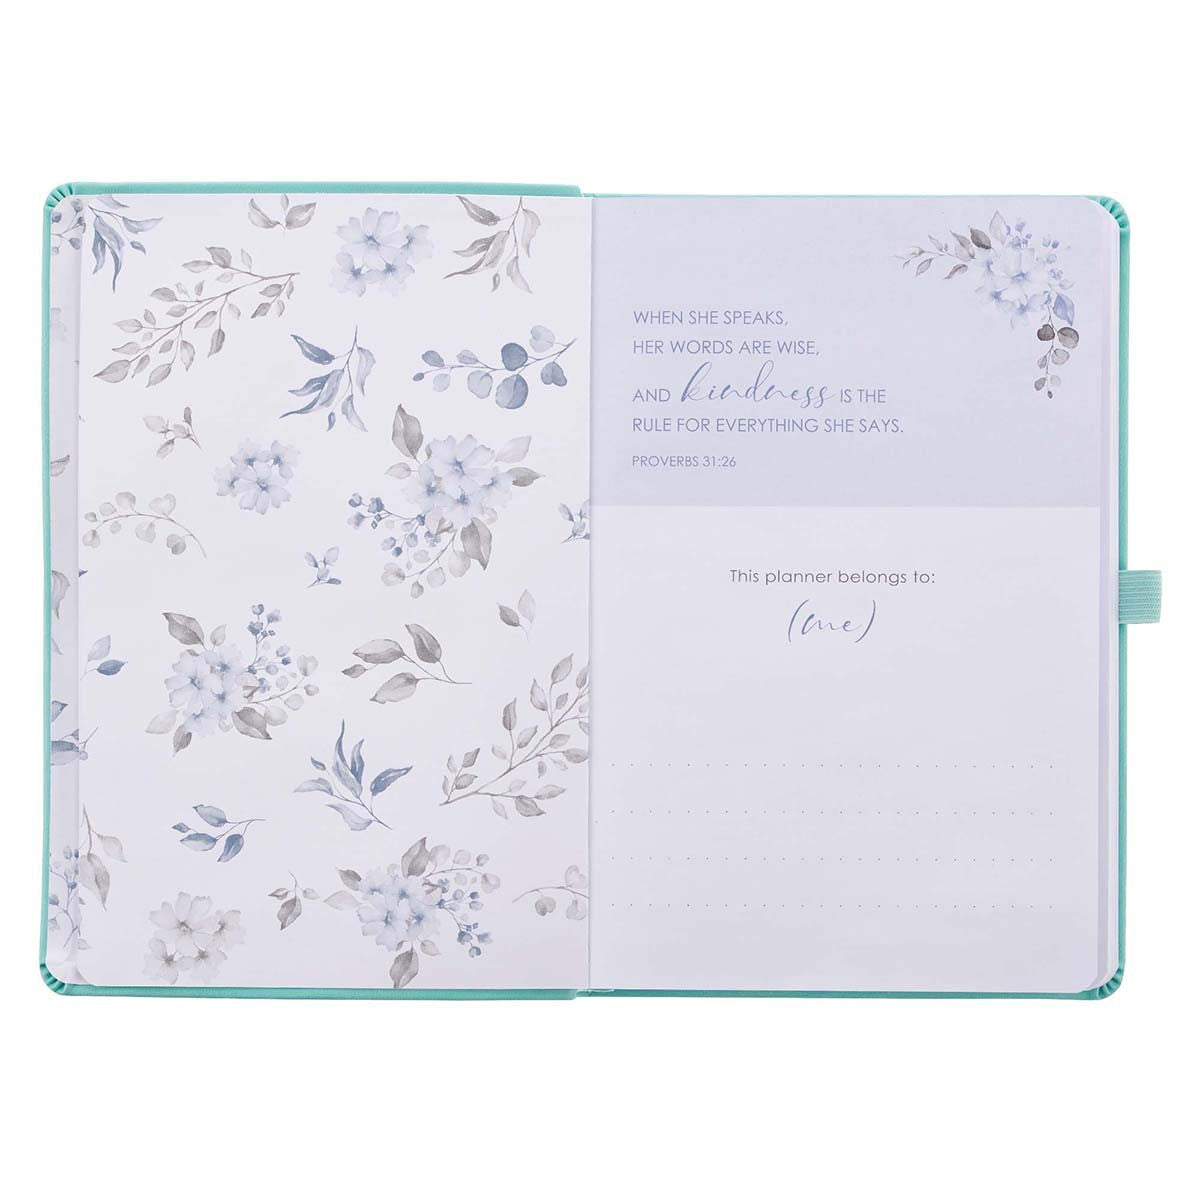 Mint Green Faux Leather Rolene Strauss Undated Planner